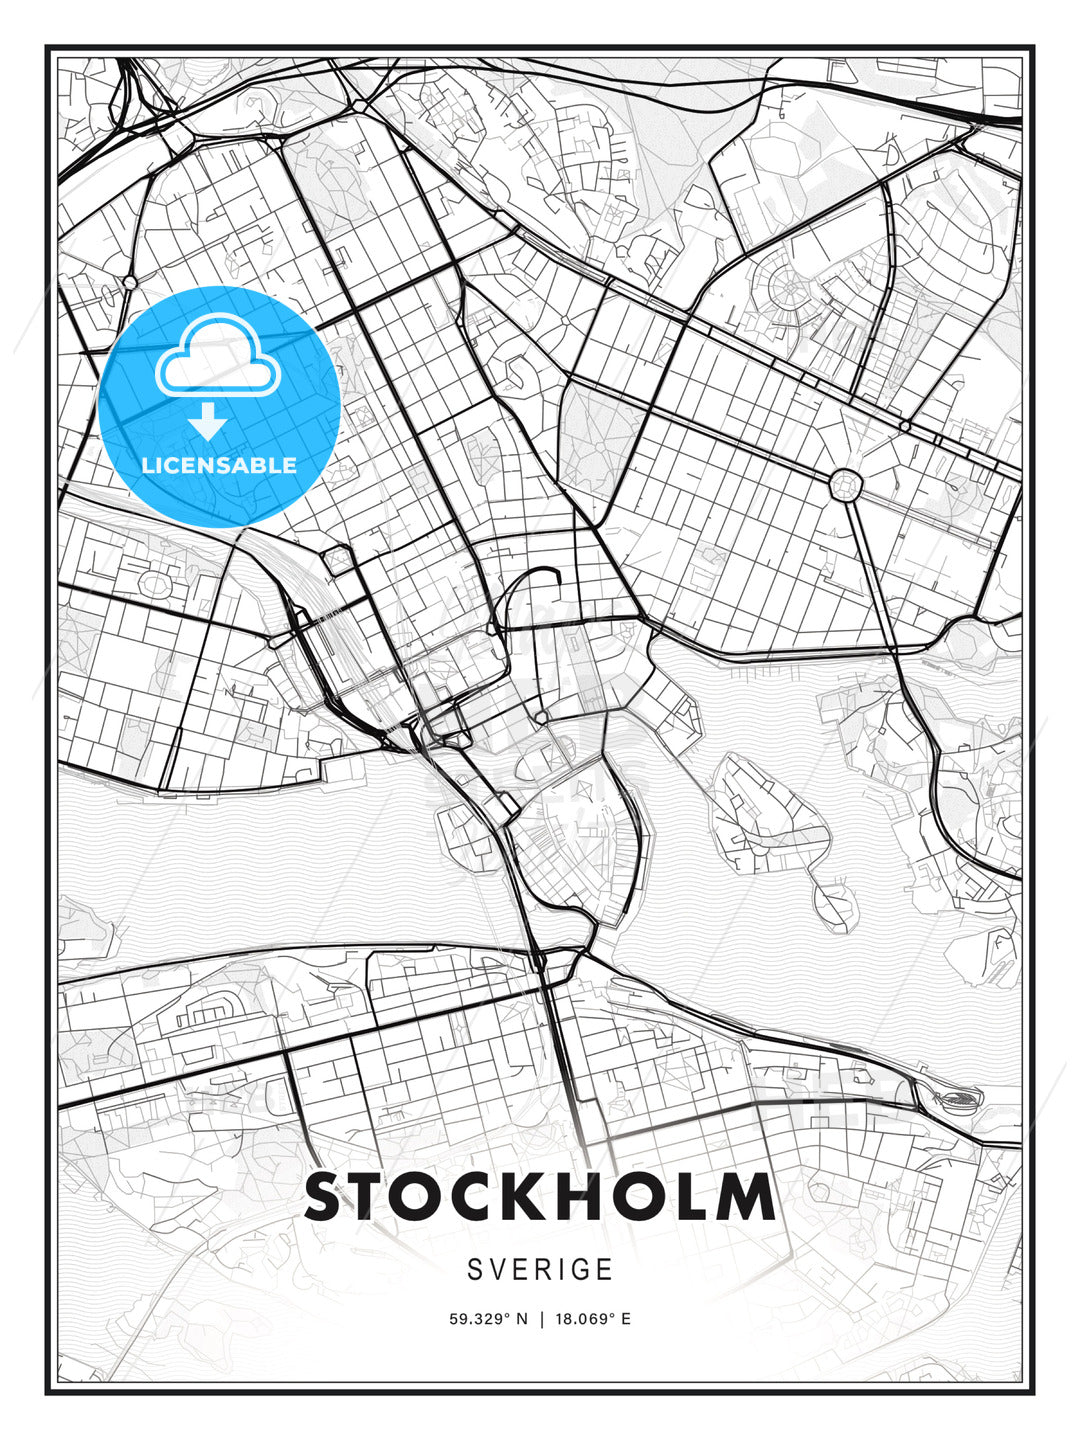 Stockholm, Sweden, Modern Print Template in Various Formats - HEBSTREITS Sketches